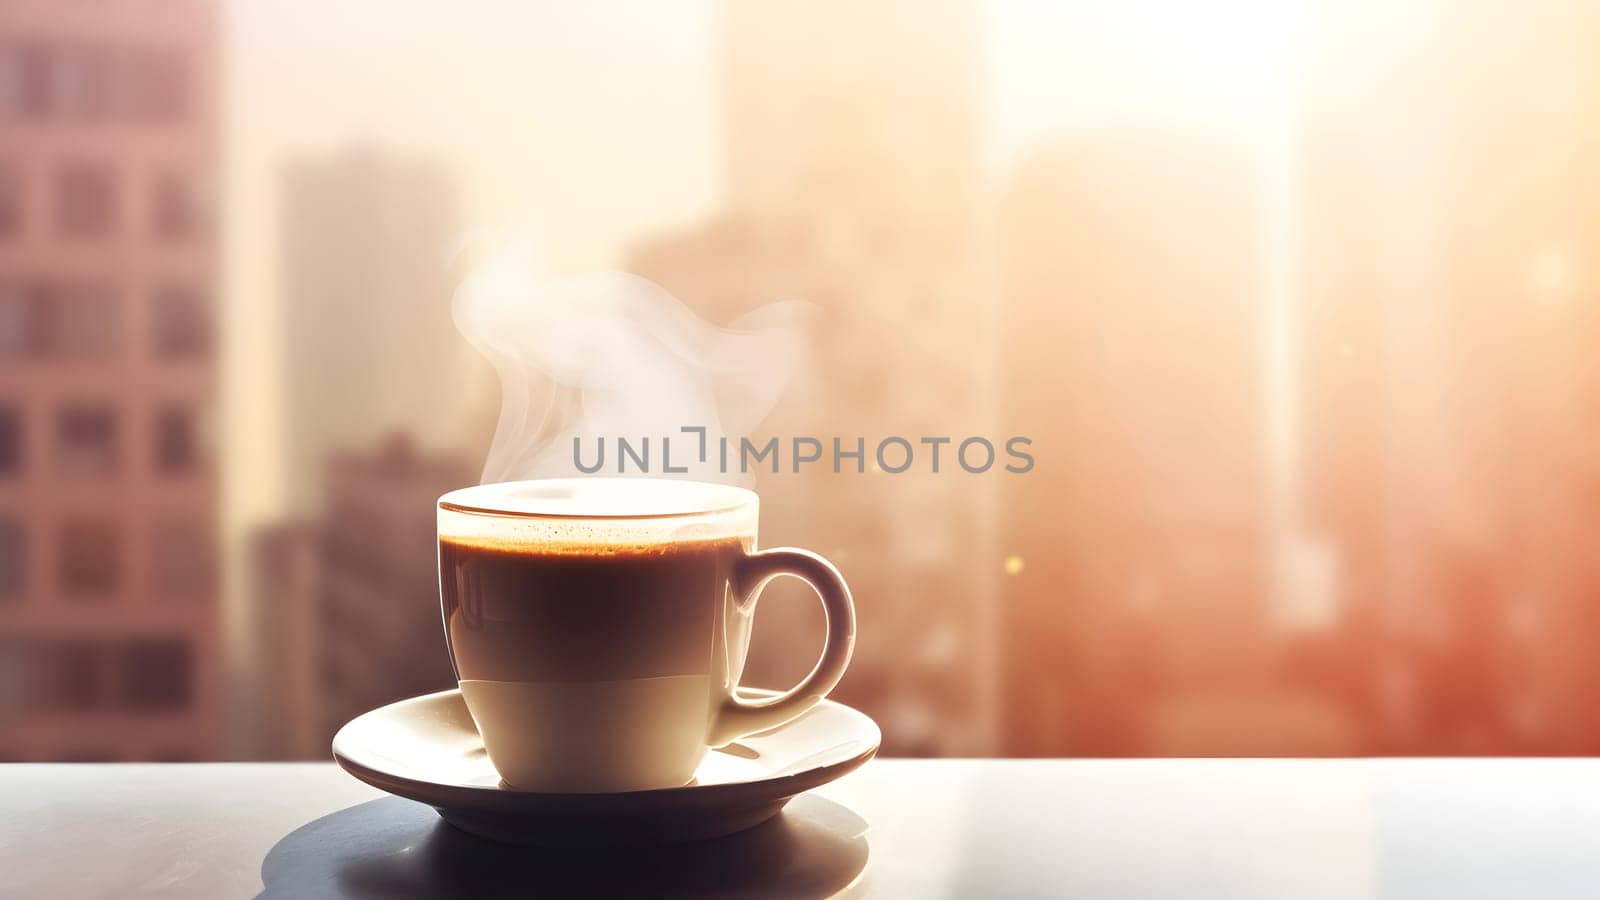 hot coffee cup on windowsill with blurry morning city in the background, neural network generated image by z1b